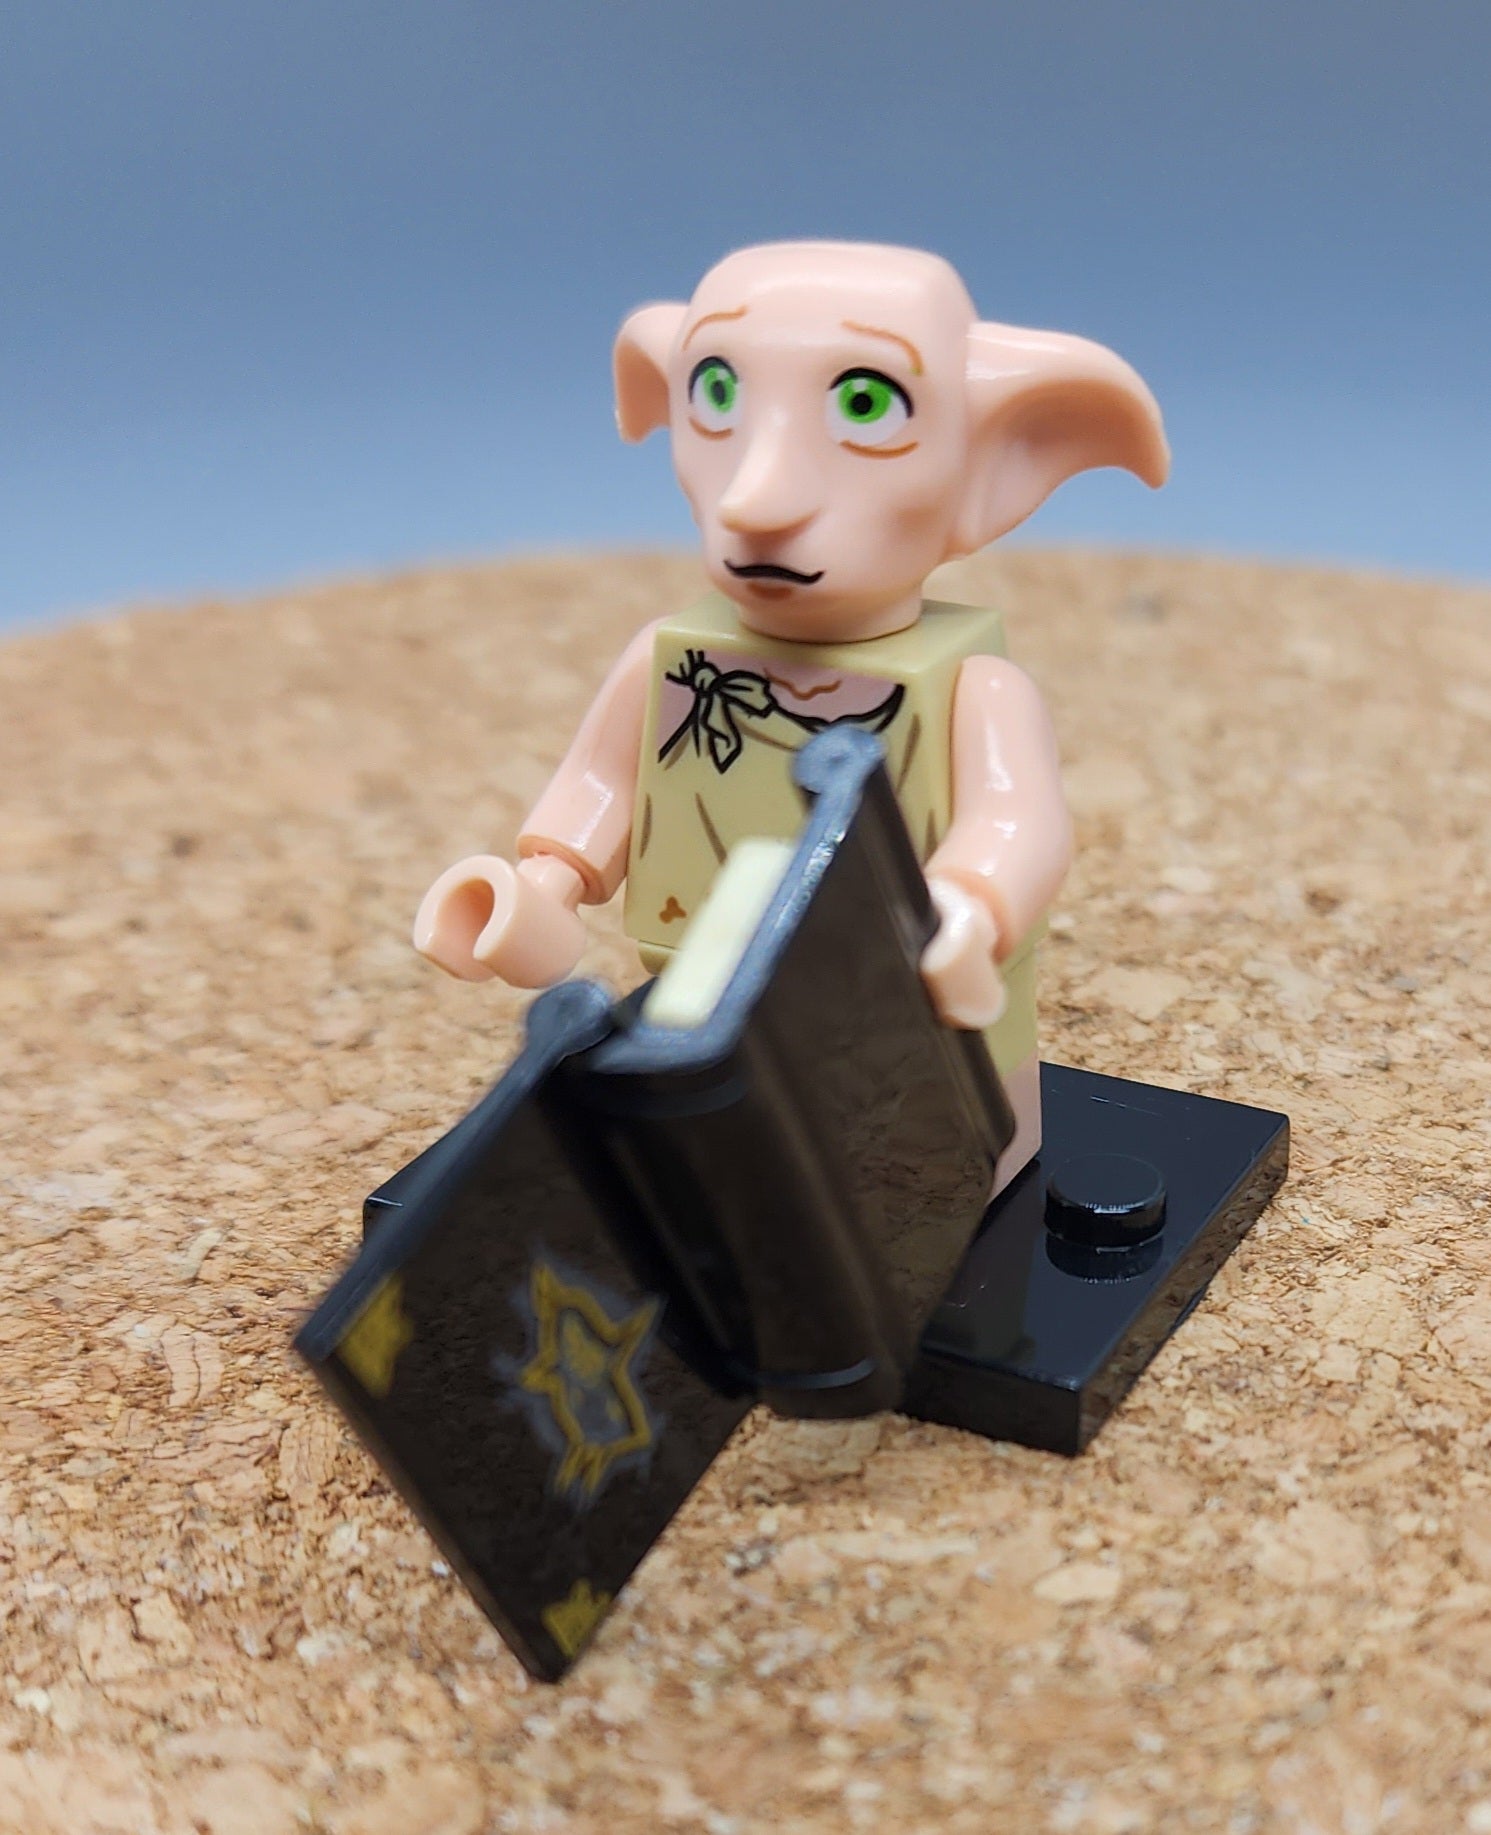 Dobby from Harry Potter Custom minifigure by Beaus Bricks.  Brand new in package.